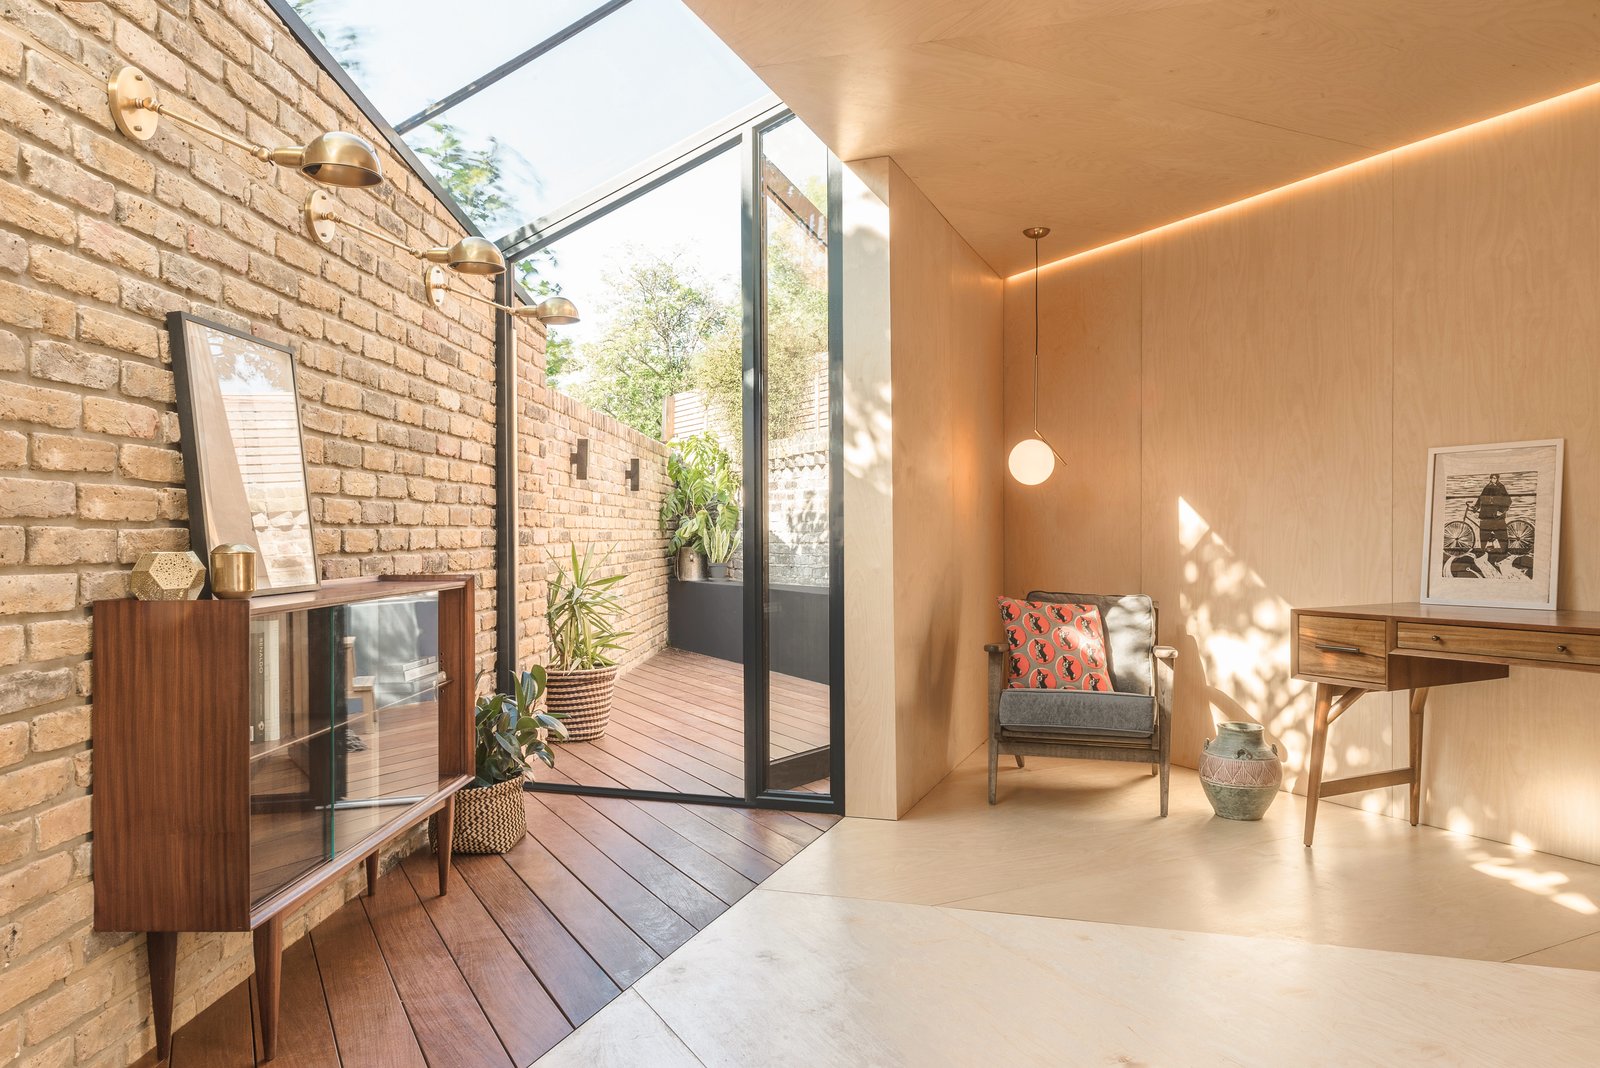 A Crafty Triangular Addition Carves Out Office Space in a London Backyard